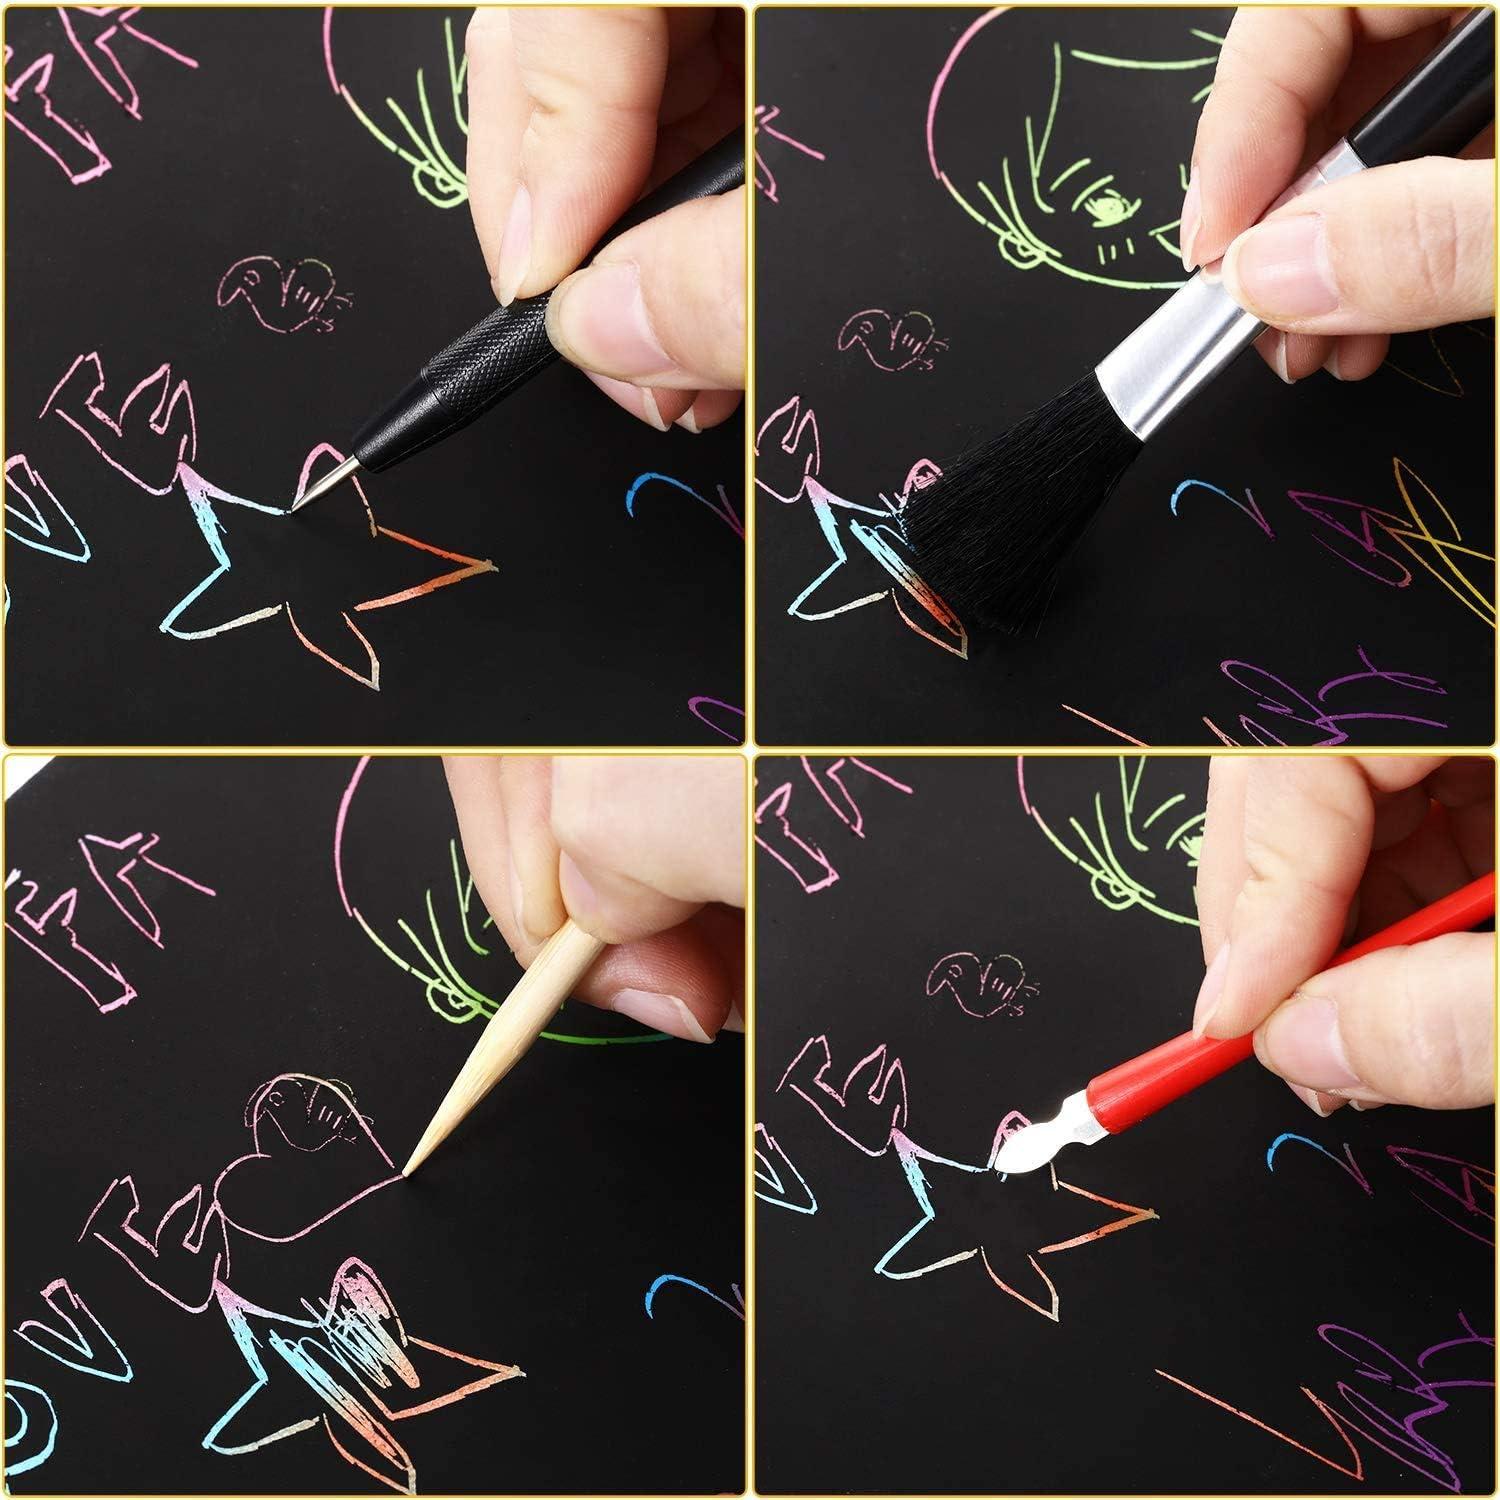 tool selection - How to keep scratch art paper clean and free of pencil and  eraser marks? - Arts & Crafts Stack Exchange